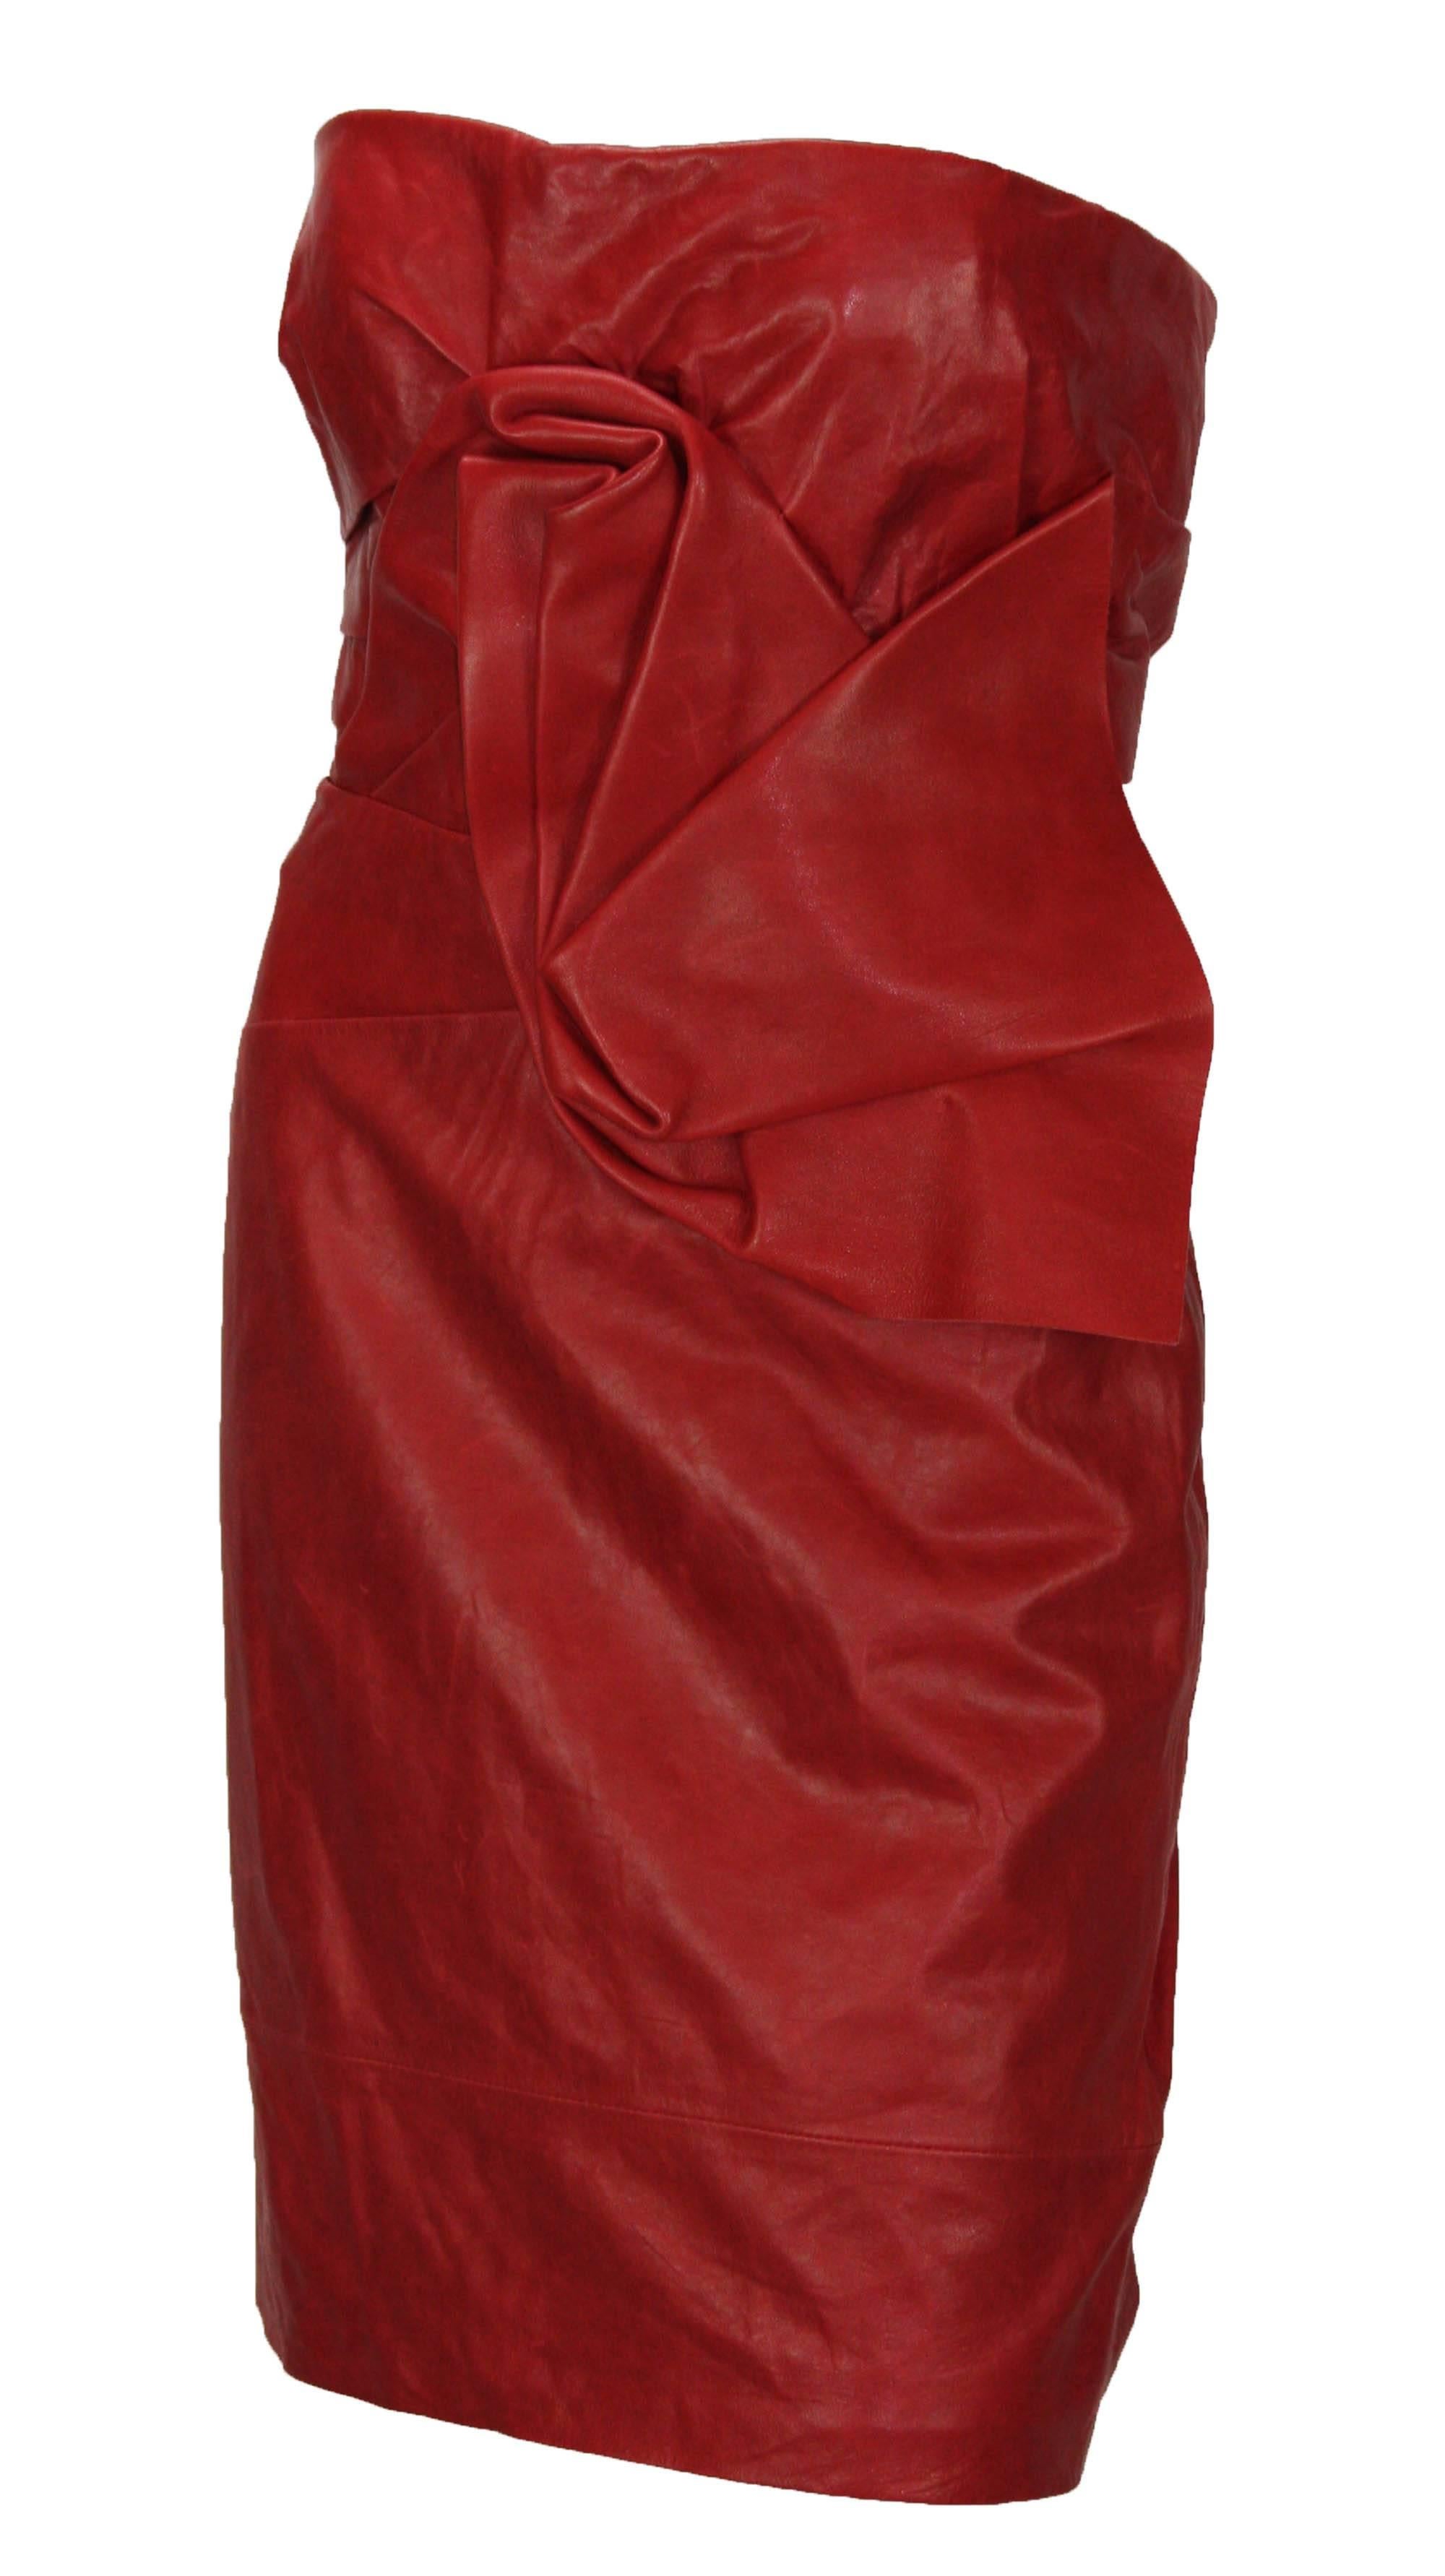 New DSQUARED2 Runway Leather Dress
Italian Size 42 - US 6
Color - Dark Red, 100% Lamb Leather, Internal Bra, Draped Detailing.
Texture Leather, Aged Effect, Fully Lined with Designer Fabric, Zip Closure.
Measurements: Length - 28 inches, Bust - 32